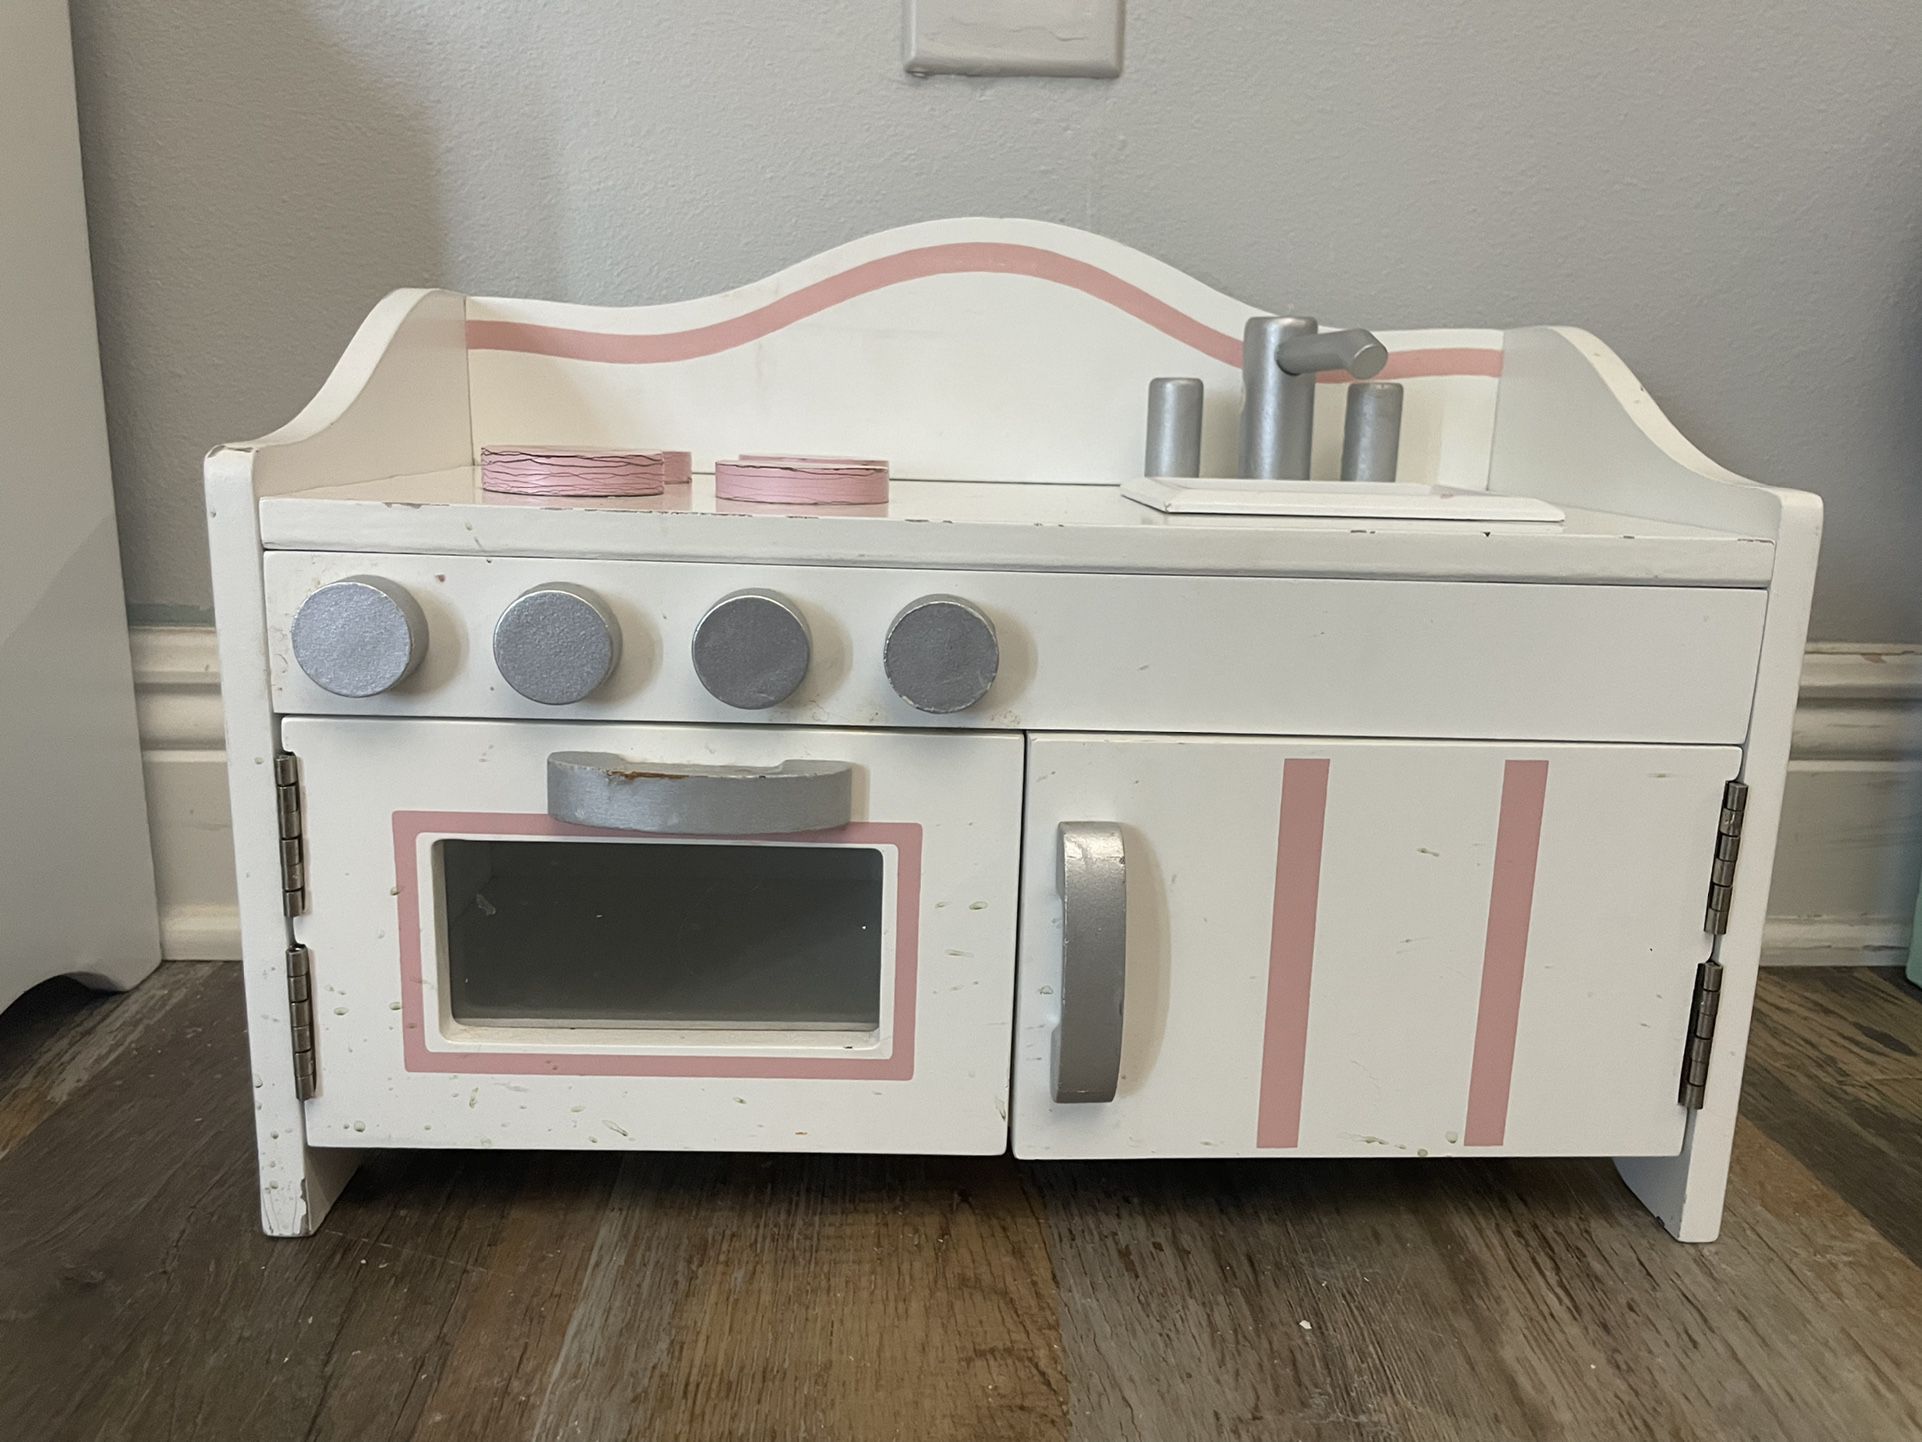 Stove and oven for 18 inch doll or American girl doll or journey girl doll